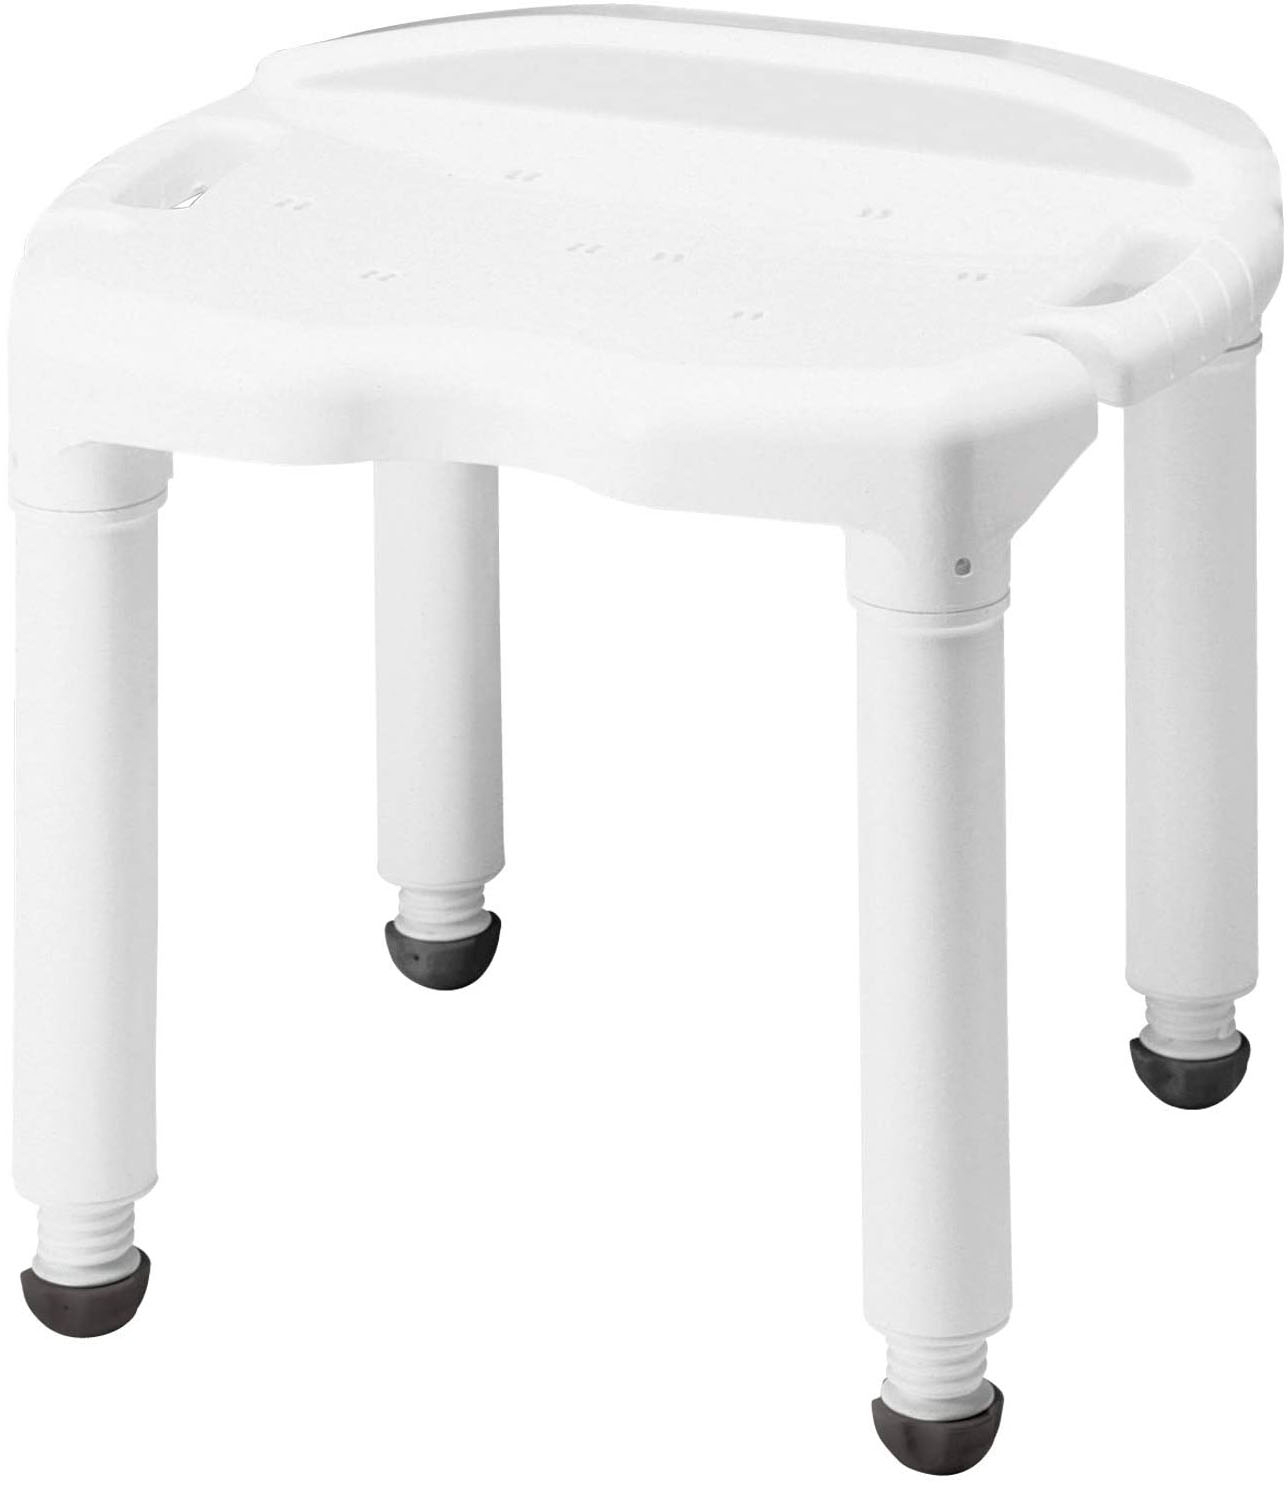 Carex Universal Bath And Shower Seat without Back - WHITE